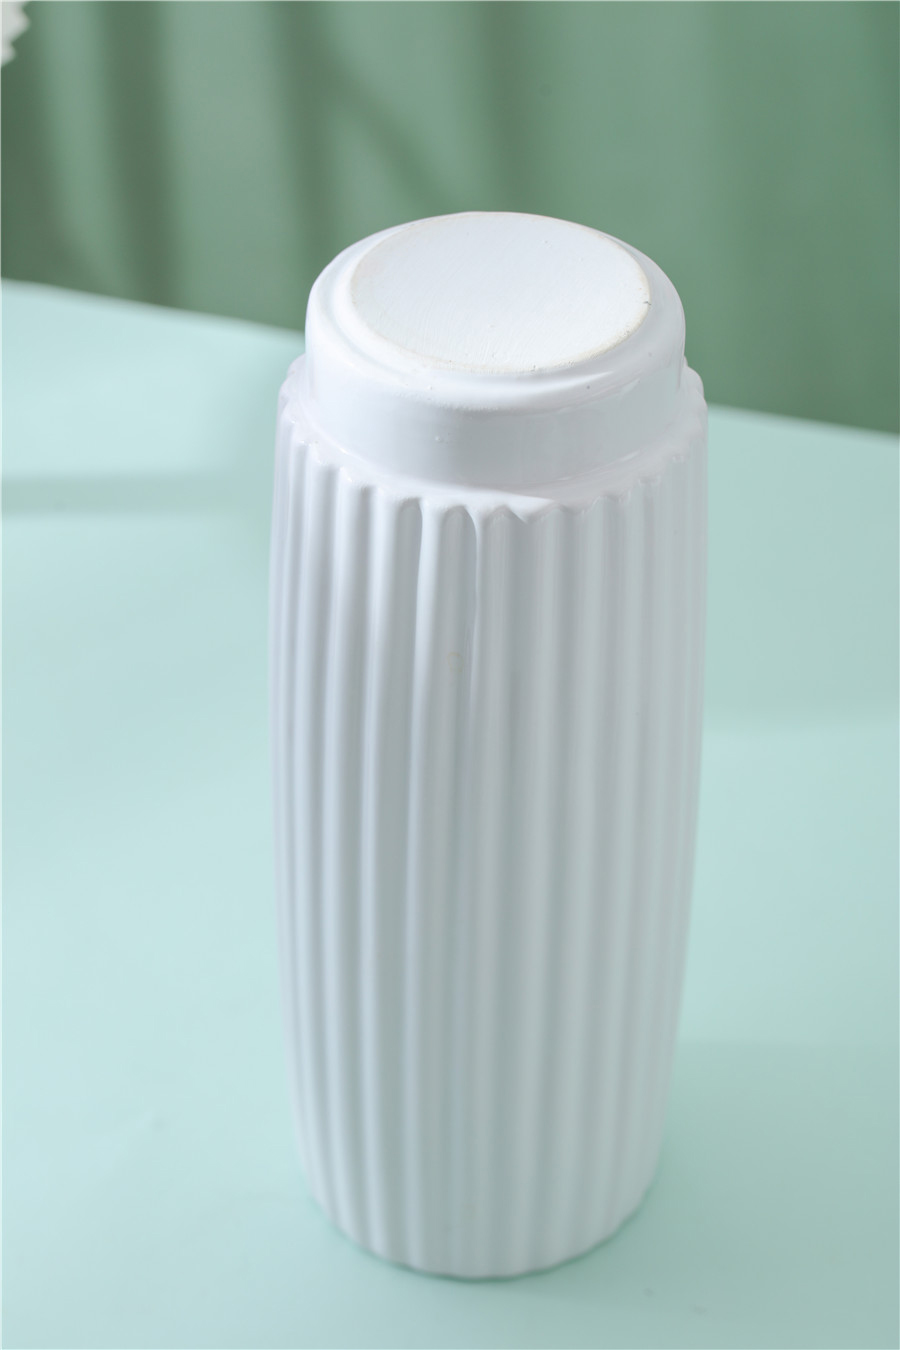 Straight Frosted Vase (8)h9l